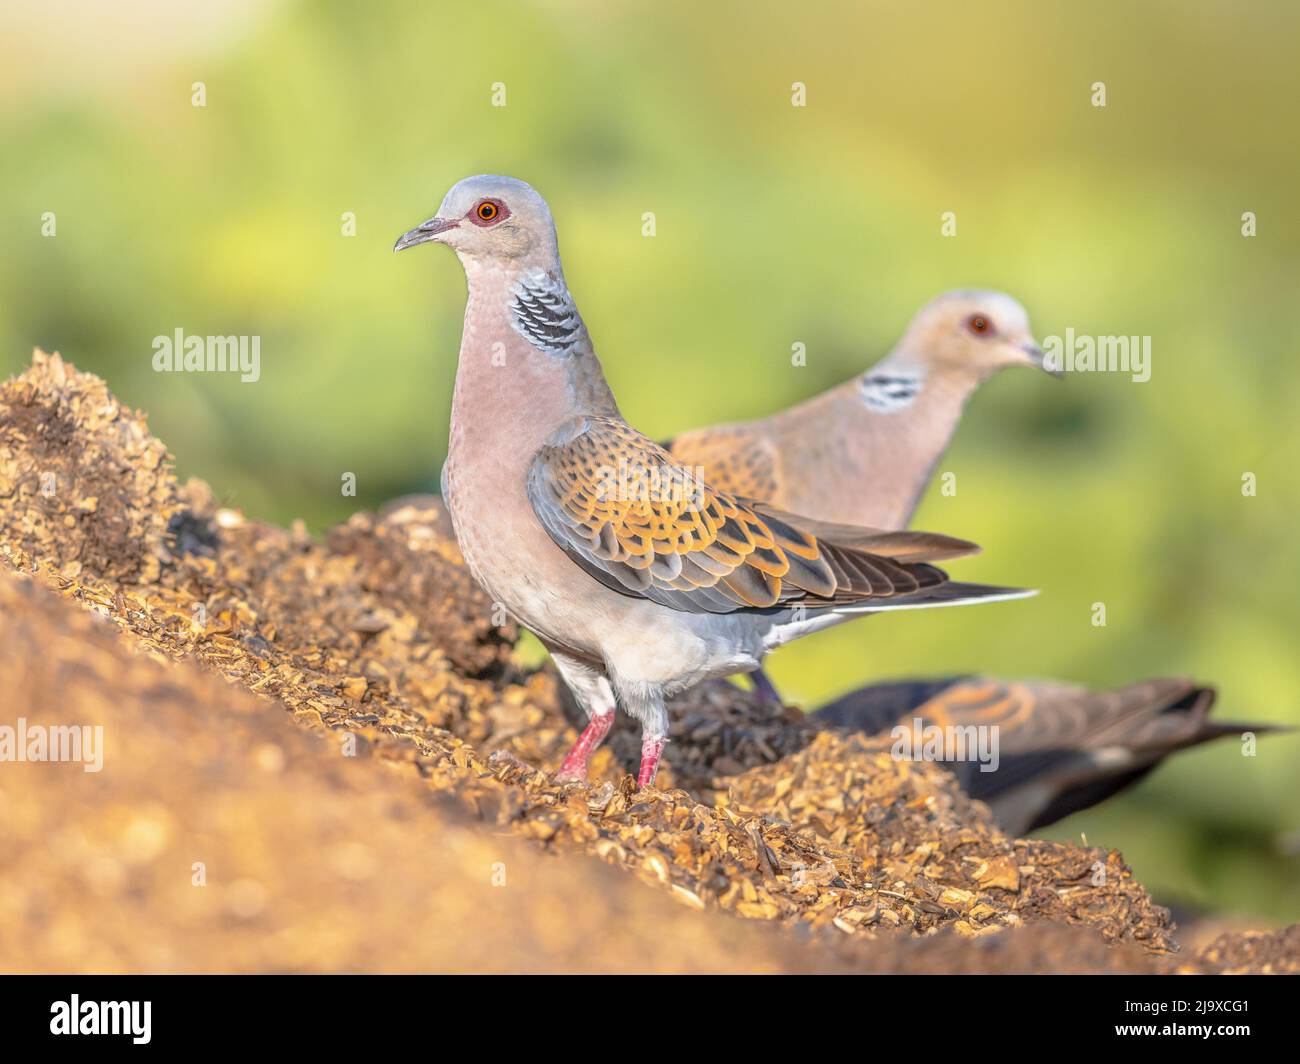 Two Turtle dove (Streptopelia turtur) perched on ground with blurred background. This is a member of the bird family Columbidae, the doves and pigeons Stock Photo